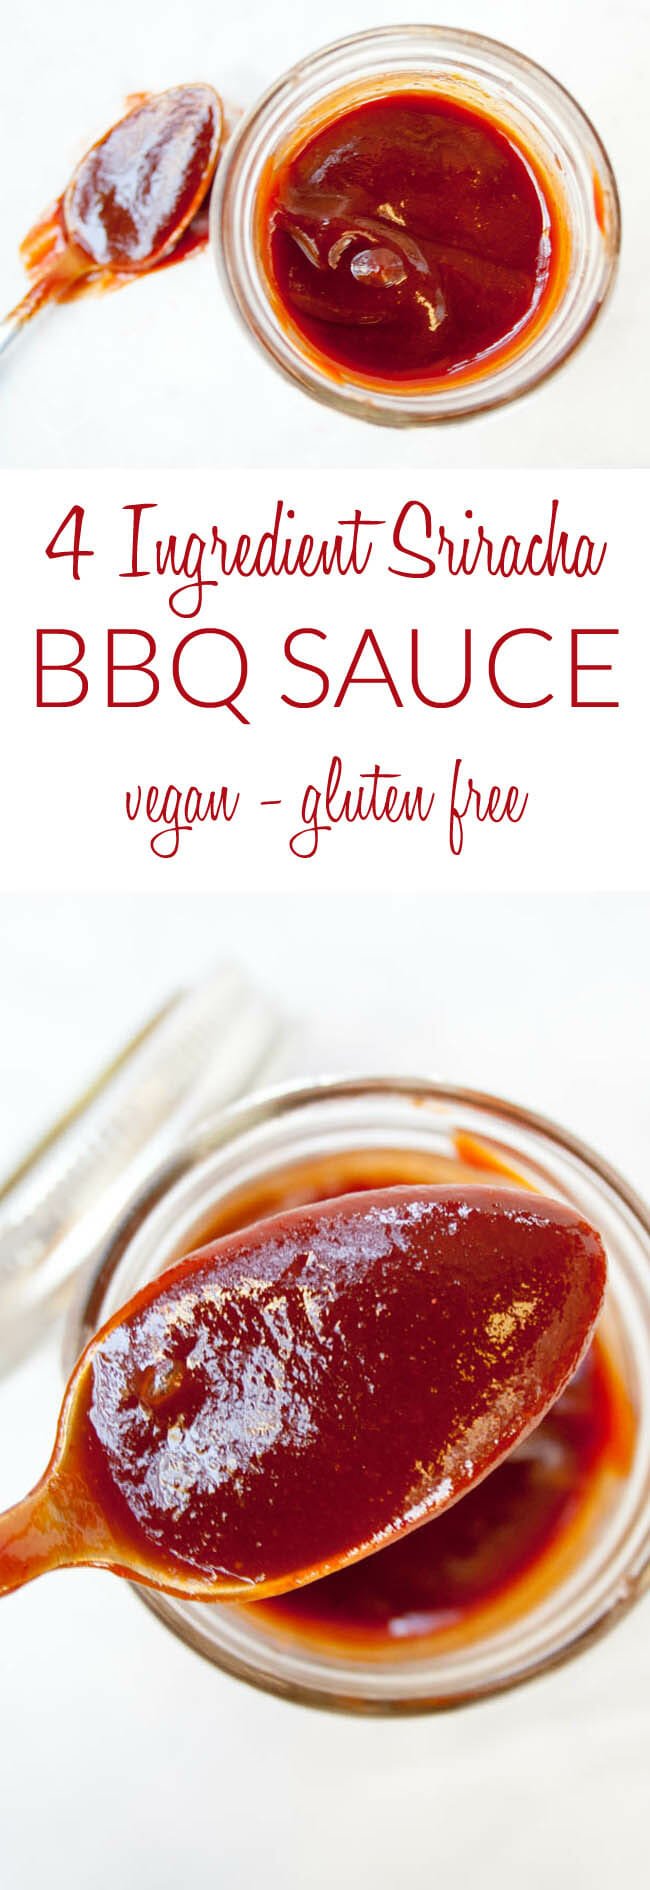 4 Ingredient Sriracha BBQ Sauce collage photo with text.